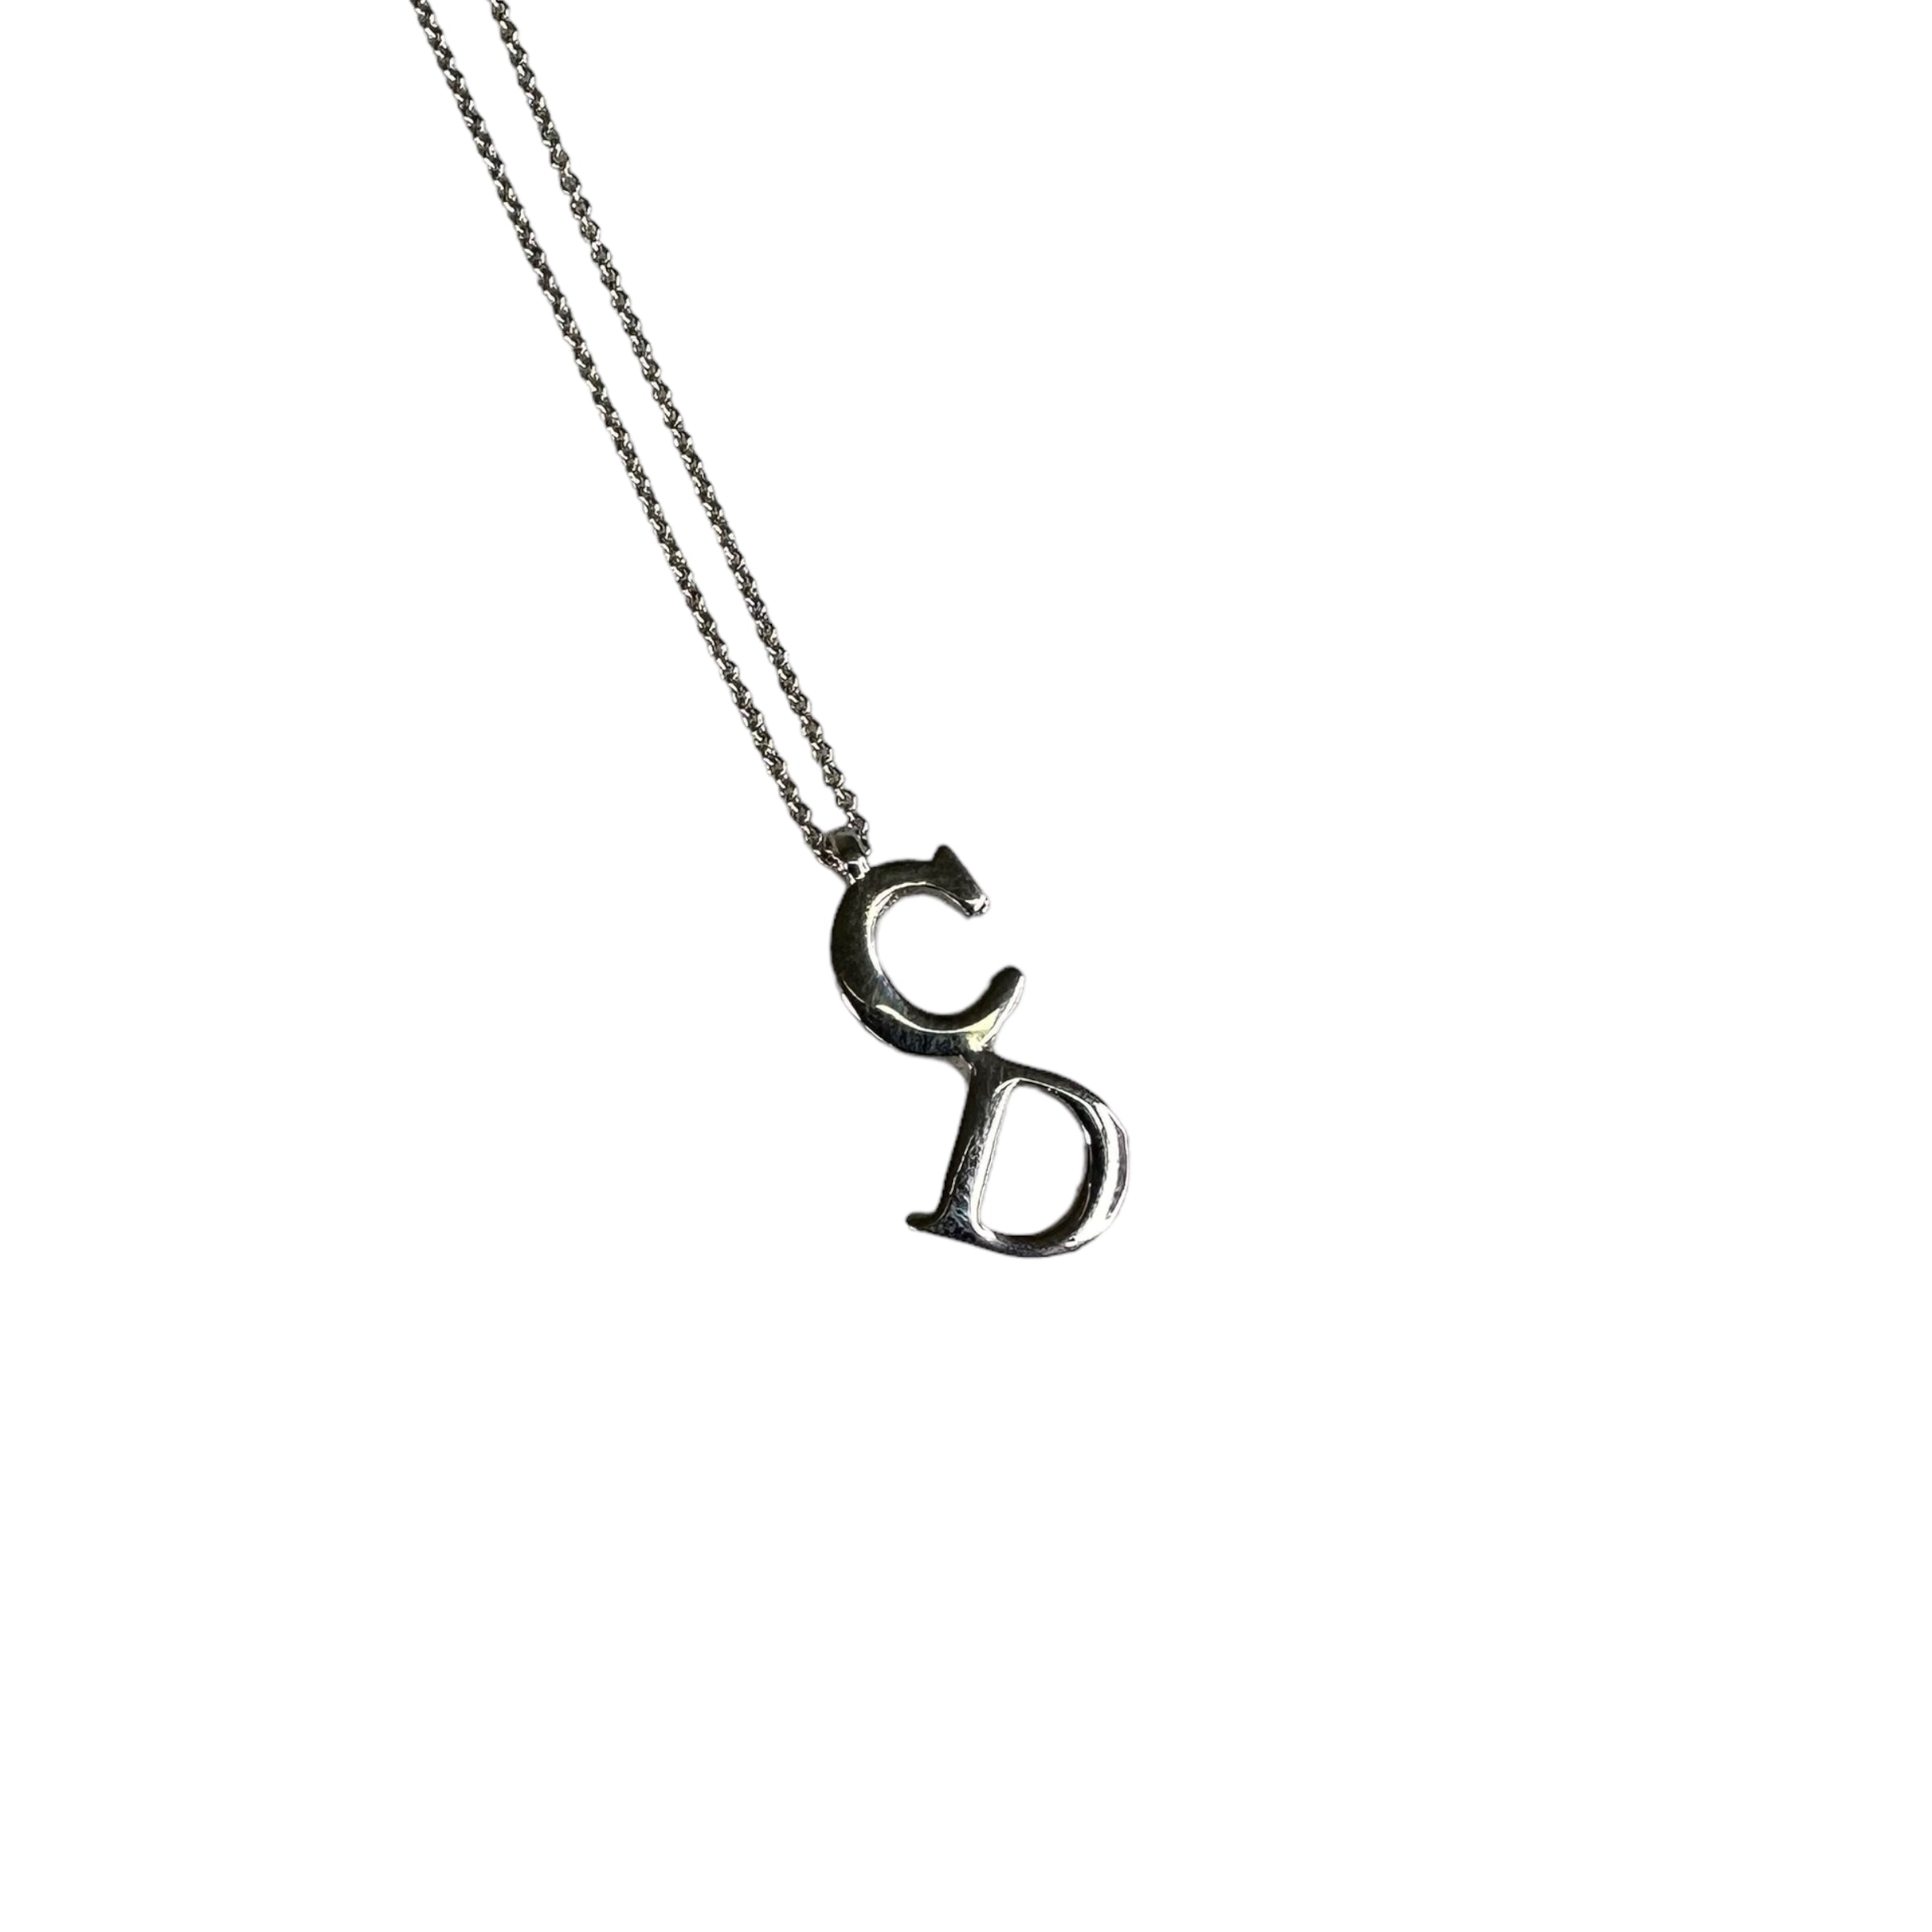 DIOR "CD" NECKLACE SILVER-PLATED